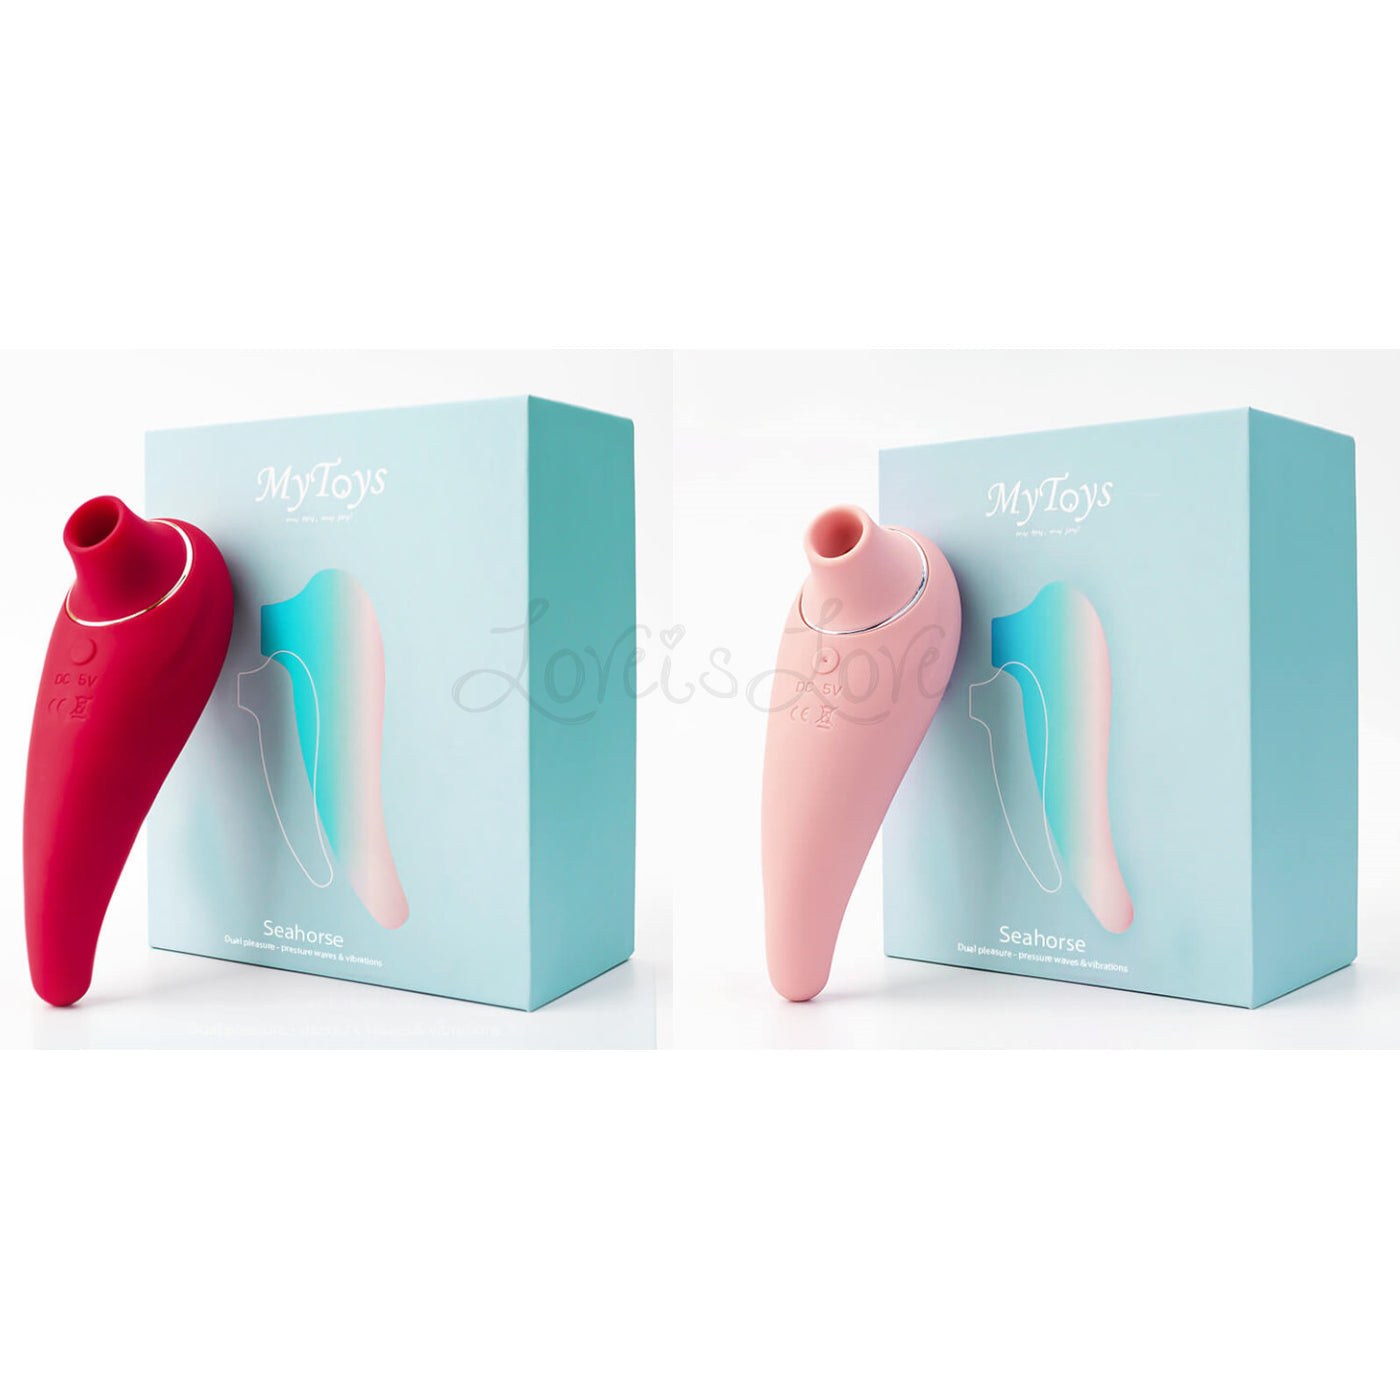 MyToys Seahorse Air Pulse Stimulation and G-spot Vibrator Red or Sakur picture